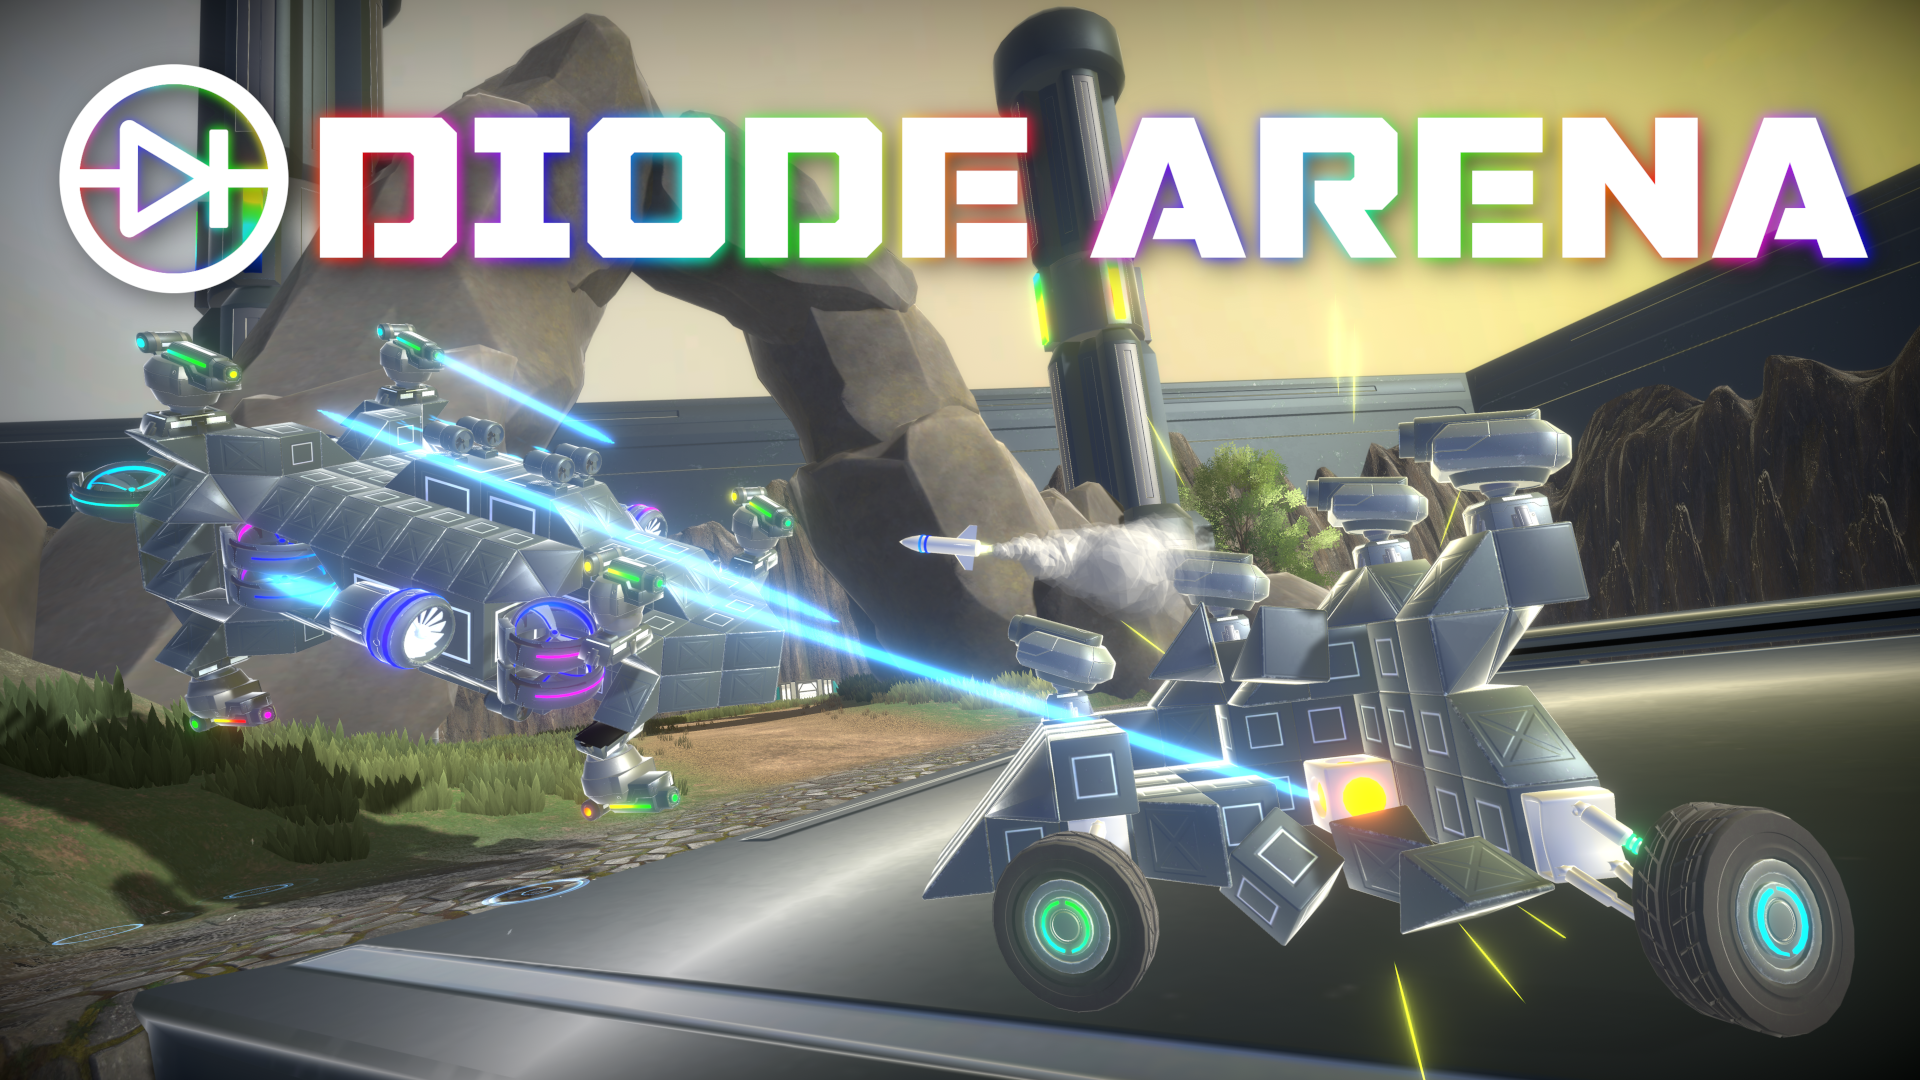 Diode Arena main cover image